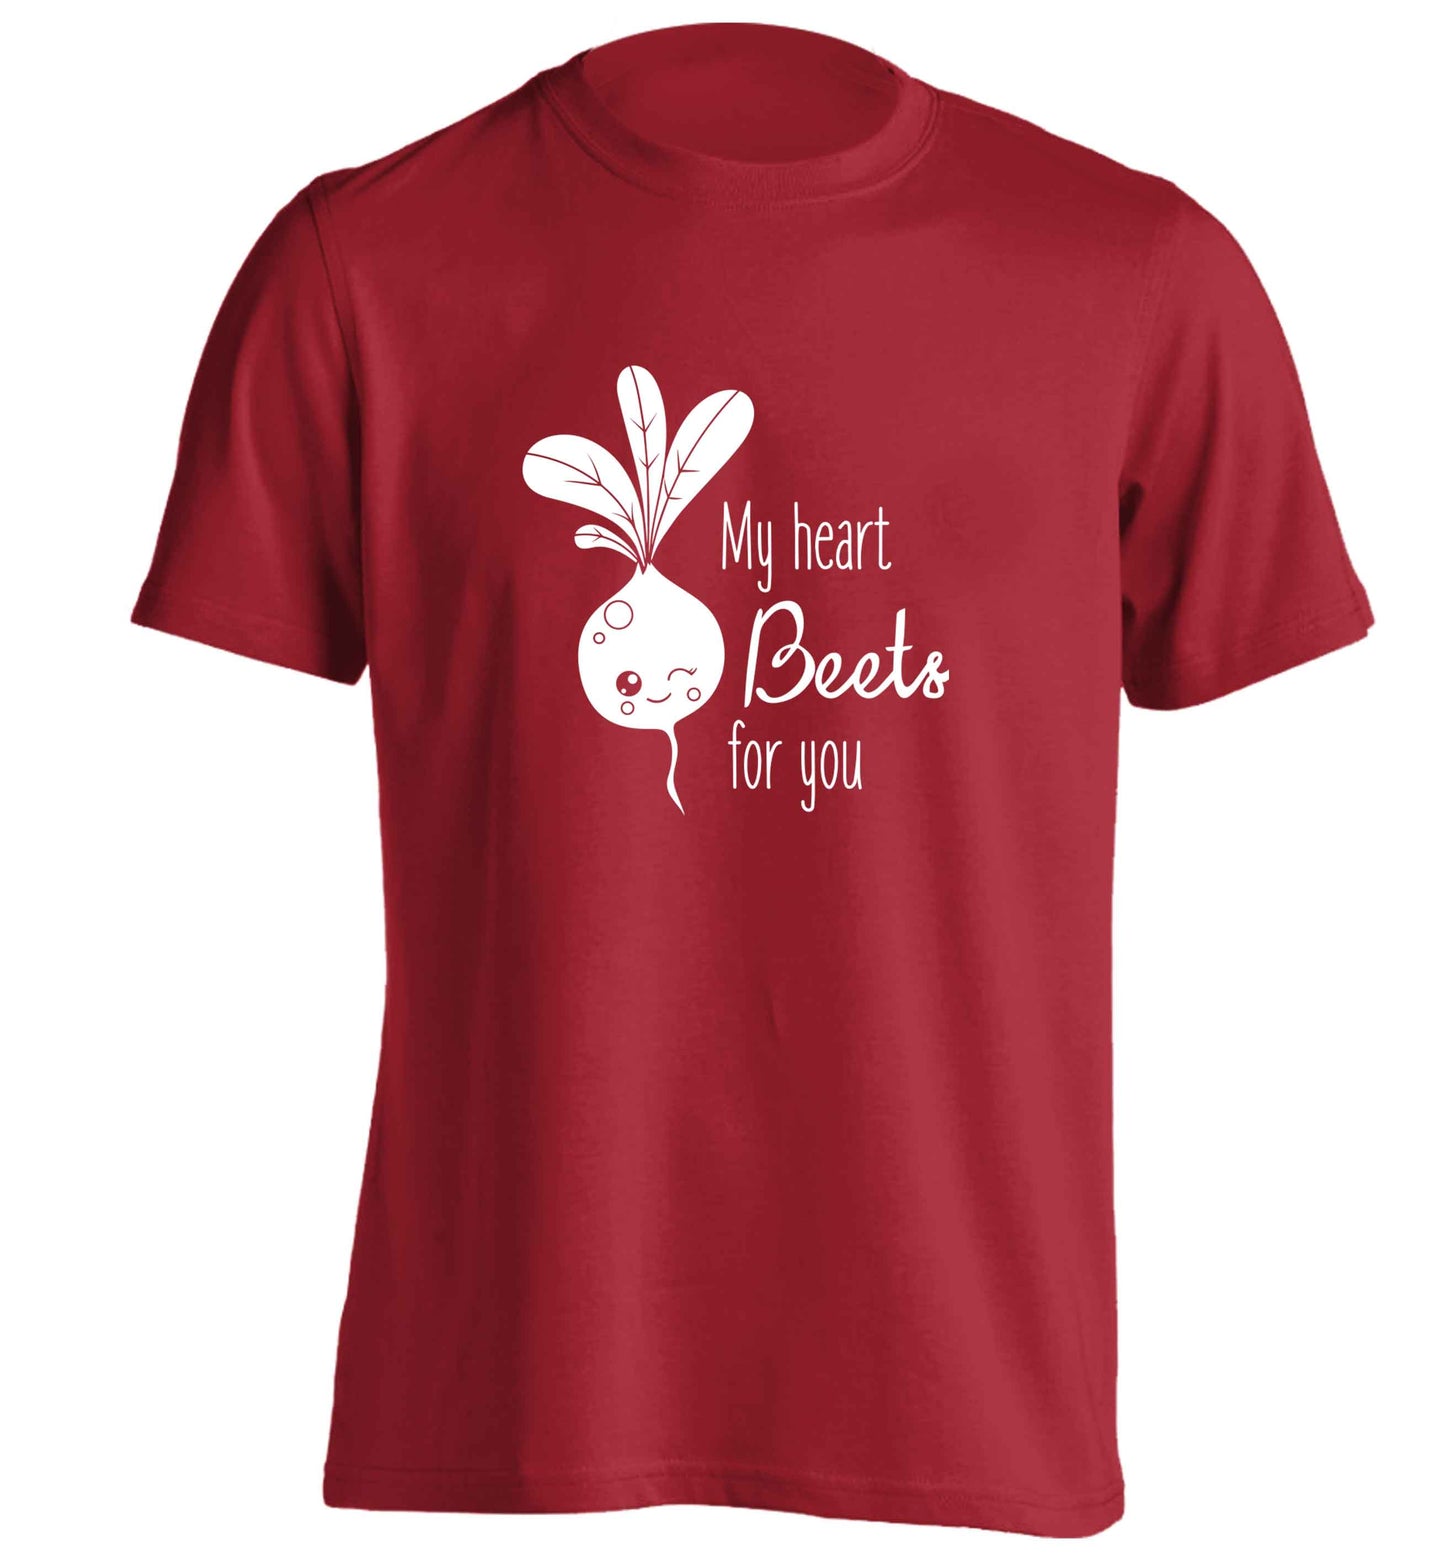 My heart beets for you adults unisex red Tshirt 2XL